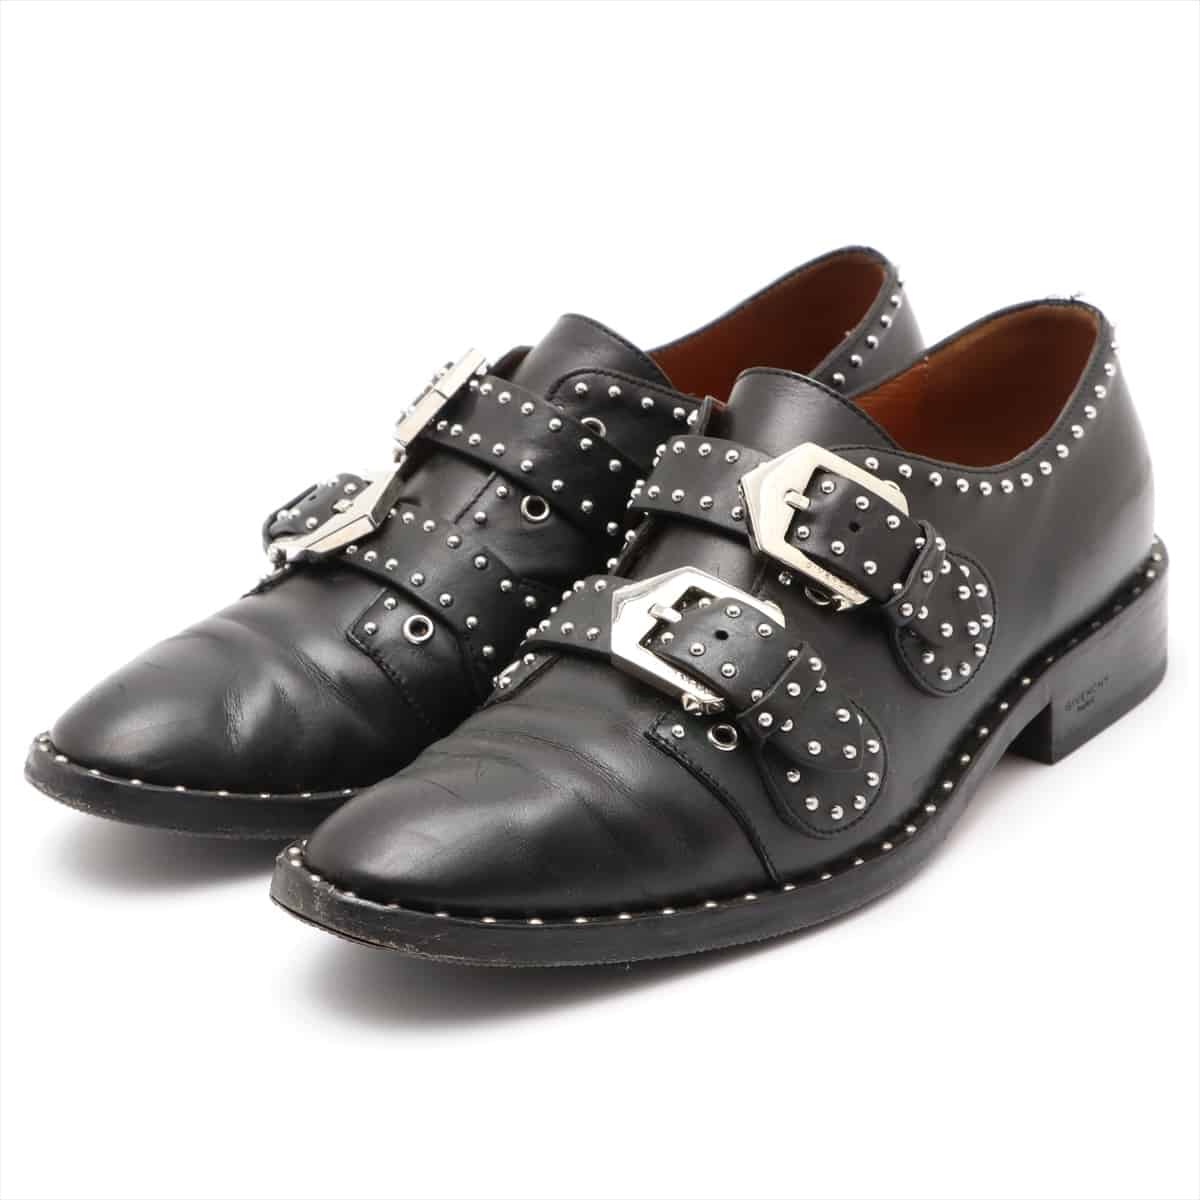 Givenchy Leather Shoes 38 Ladies' Black Studs